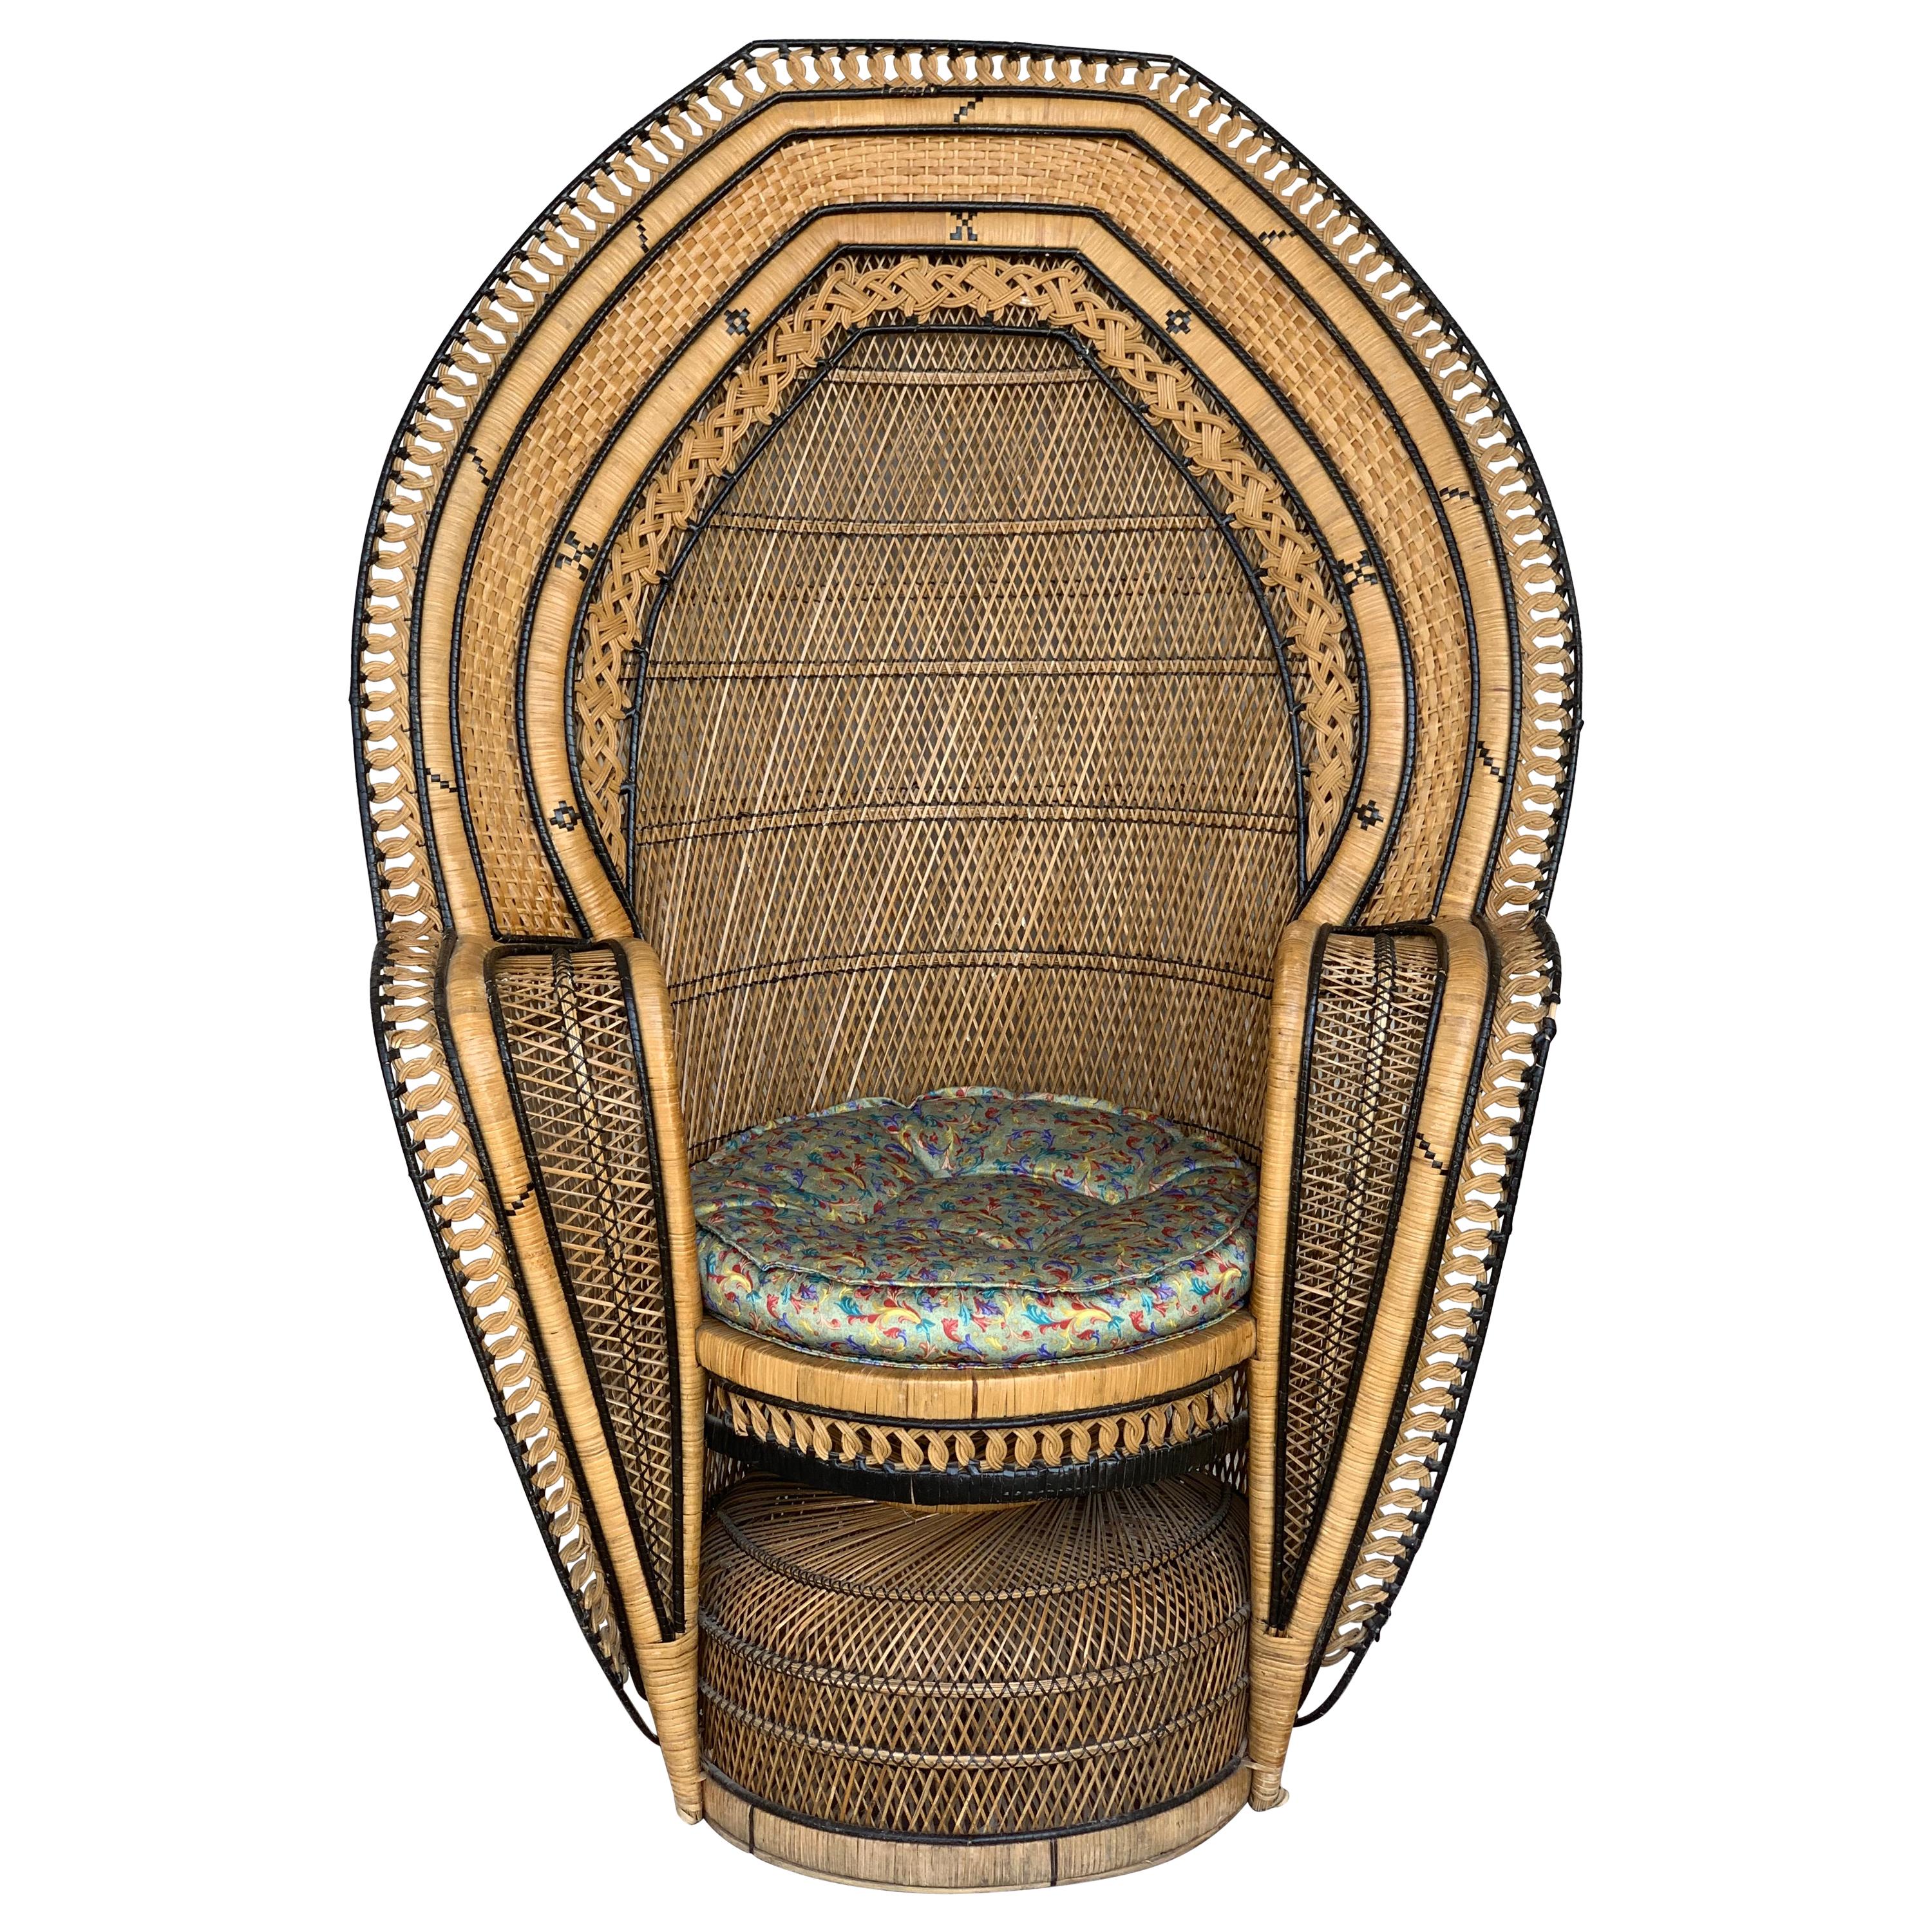 Stunning handwoven vintage peacock chair from the 1970s.
Please note the details and different techniques in this chair. 
Made out of wicker, rattan and reed.
Great for indoor and outdoor use.

Measures: Seat and cushion diameter 21in.